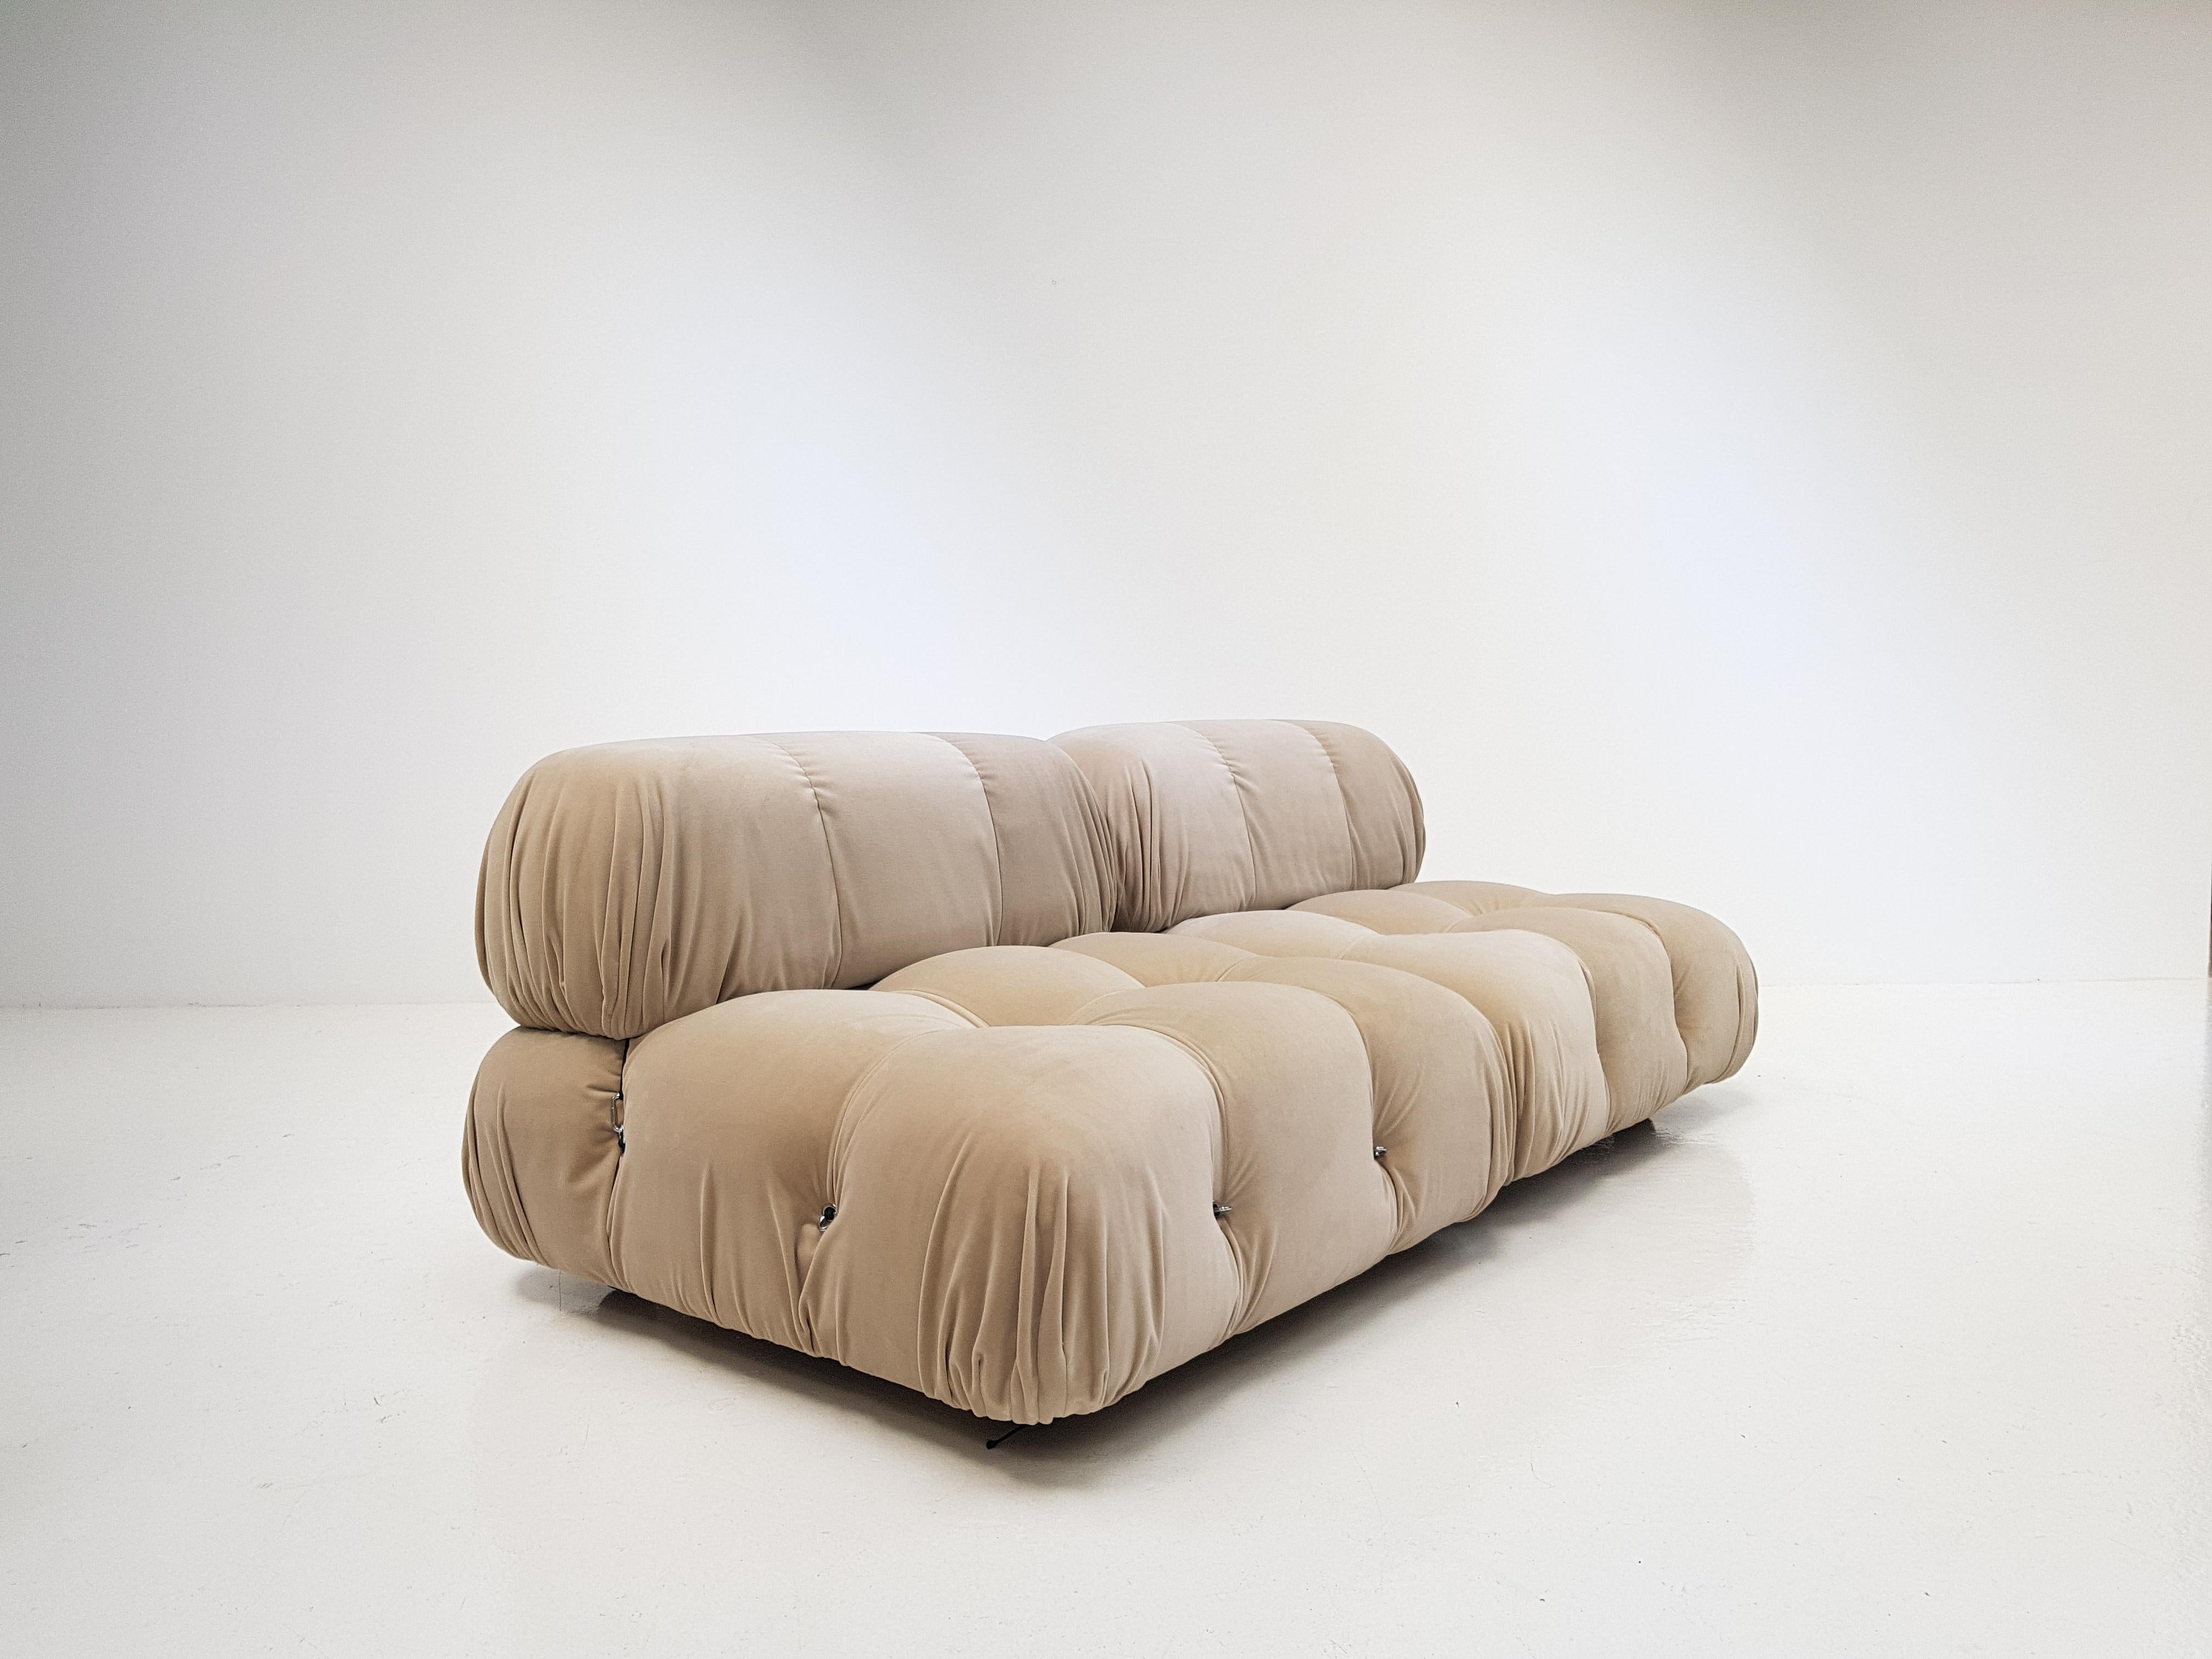 A Mario Bellini 'Camaleonda' modular sofa for B&B Italia with new linen colour Designers Guild velvet fabric.

The Camaleonda was designed by Mario Bellini in 1971 and was manufactured first by C&B Italia and later by B&B Italia. This particular